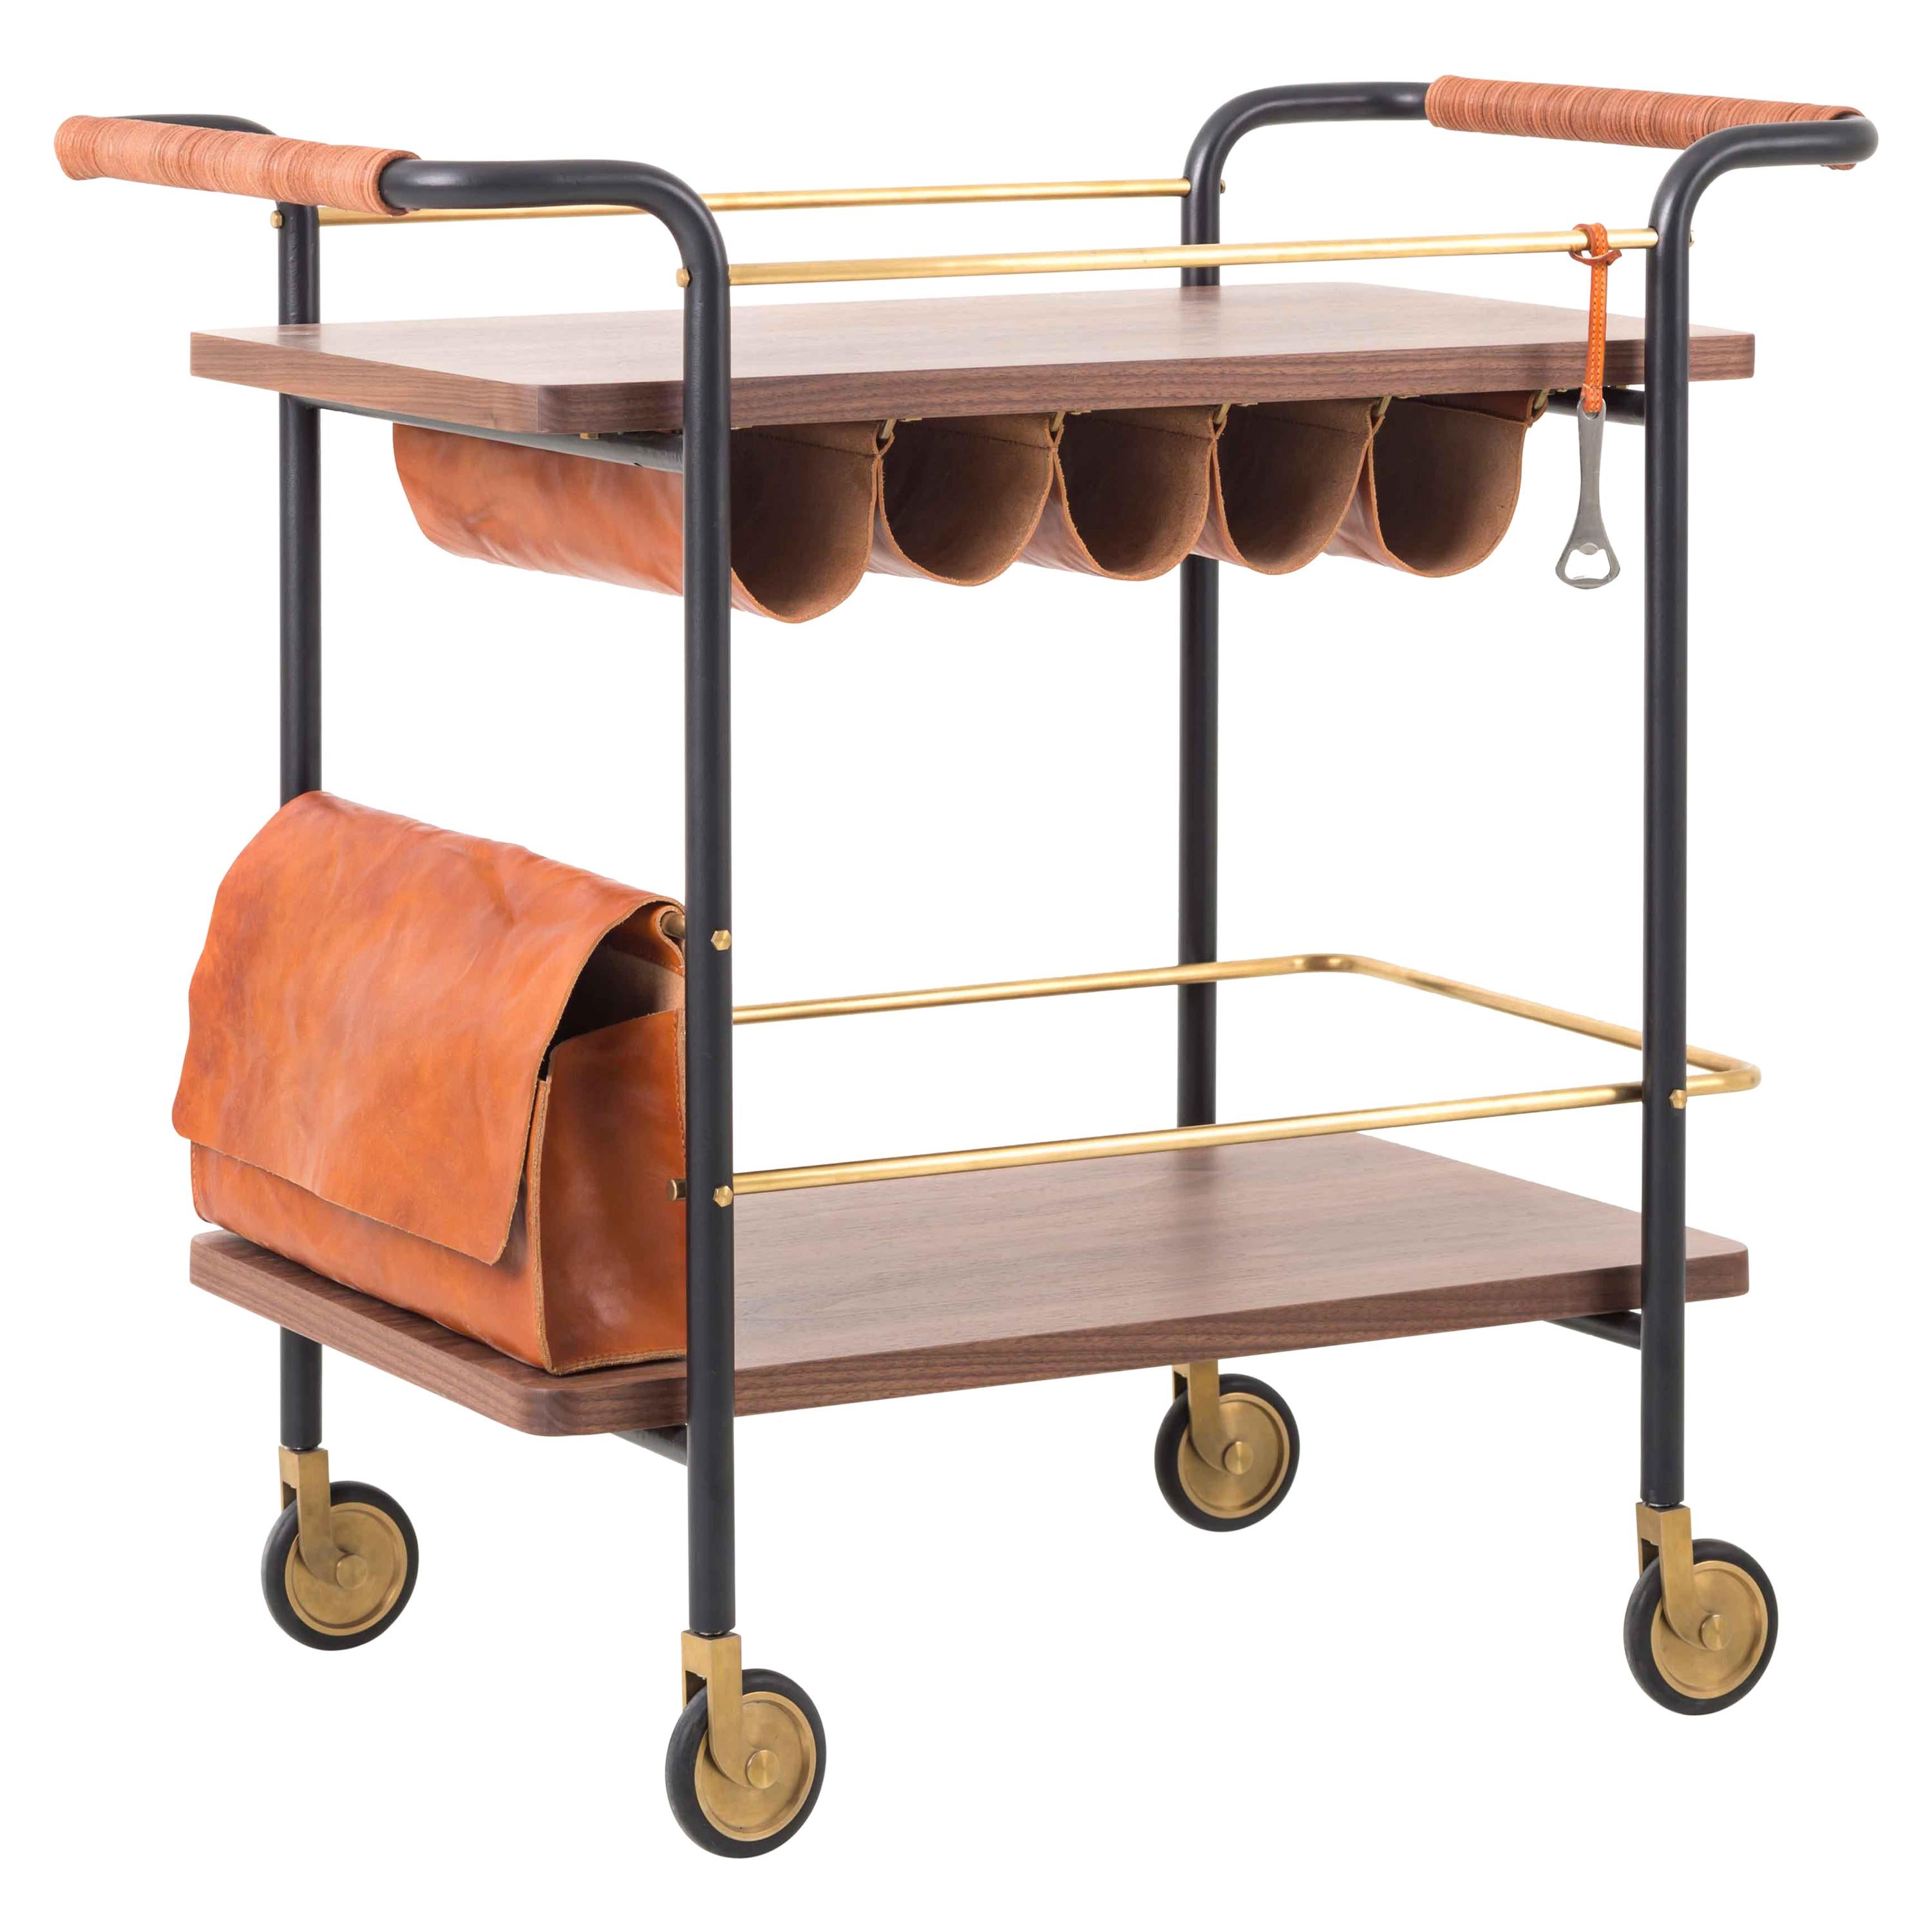 Wood and Leather Bar Cart, Valet